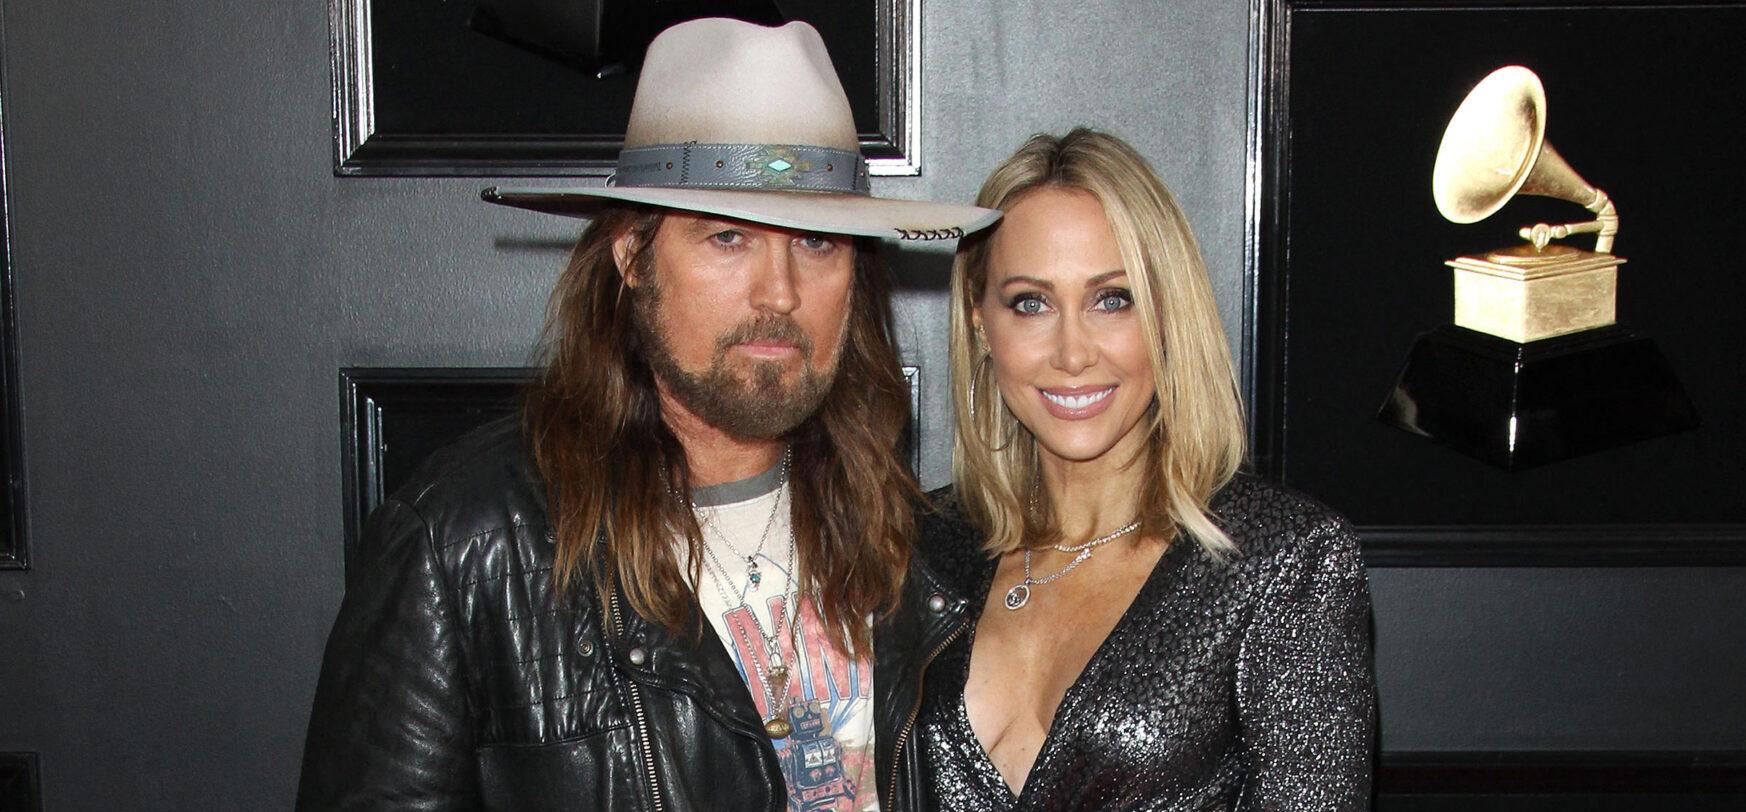 Tish Cyrus Had ‘Complete Psychological Breakdown’ After Billy Ray Divorce